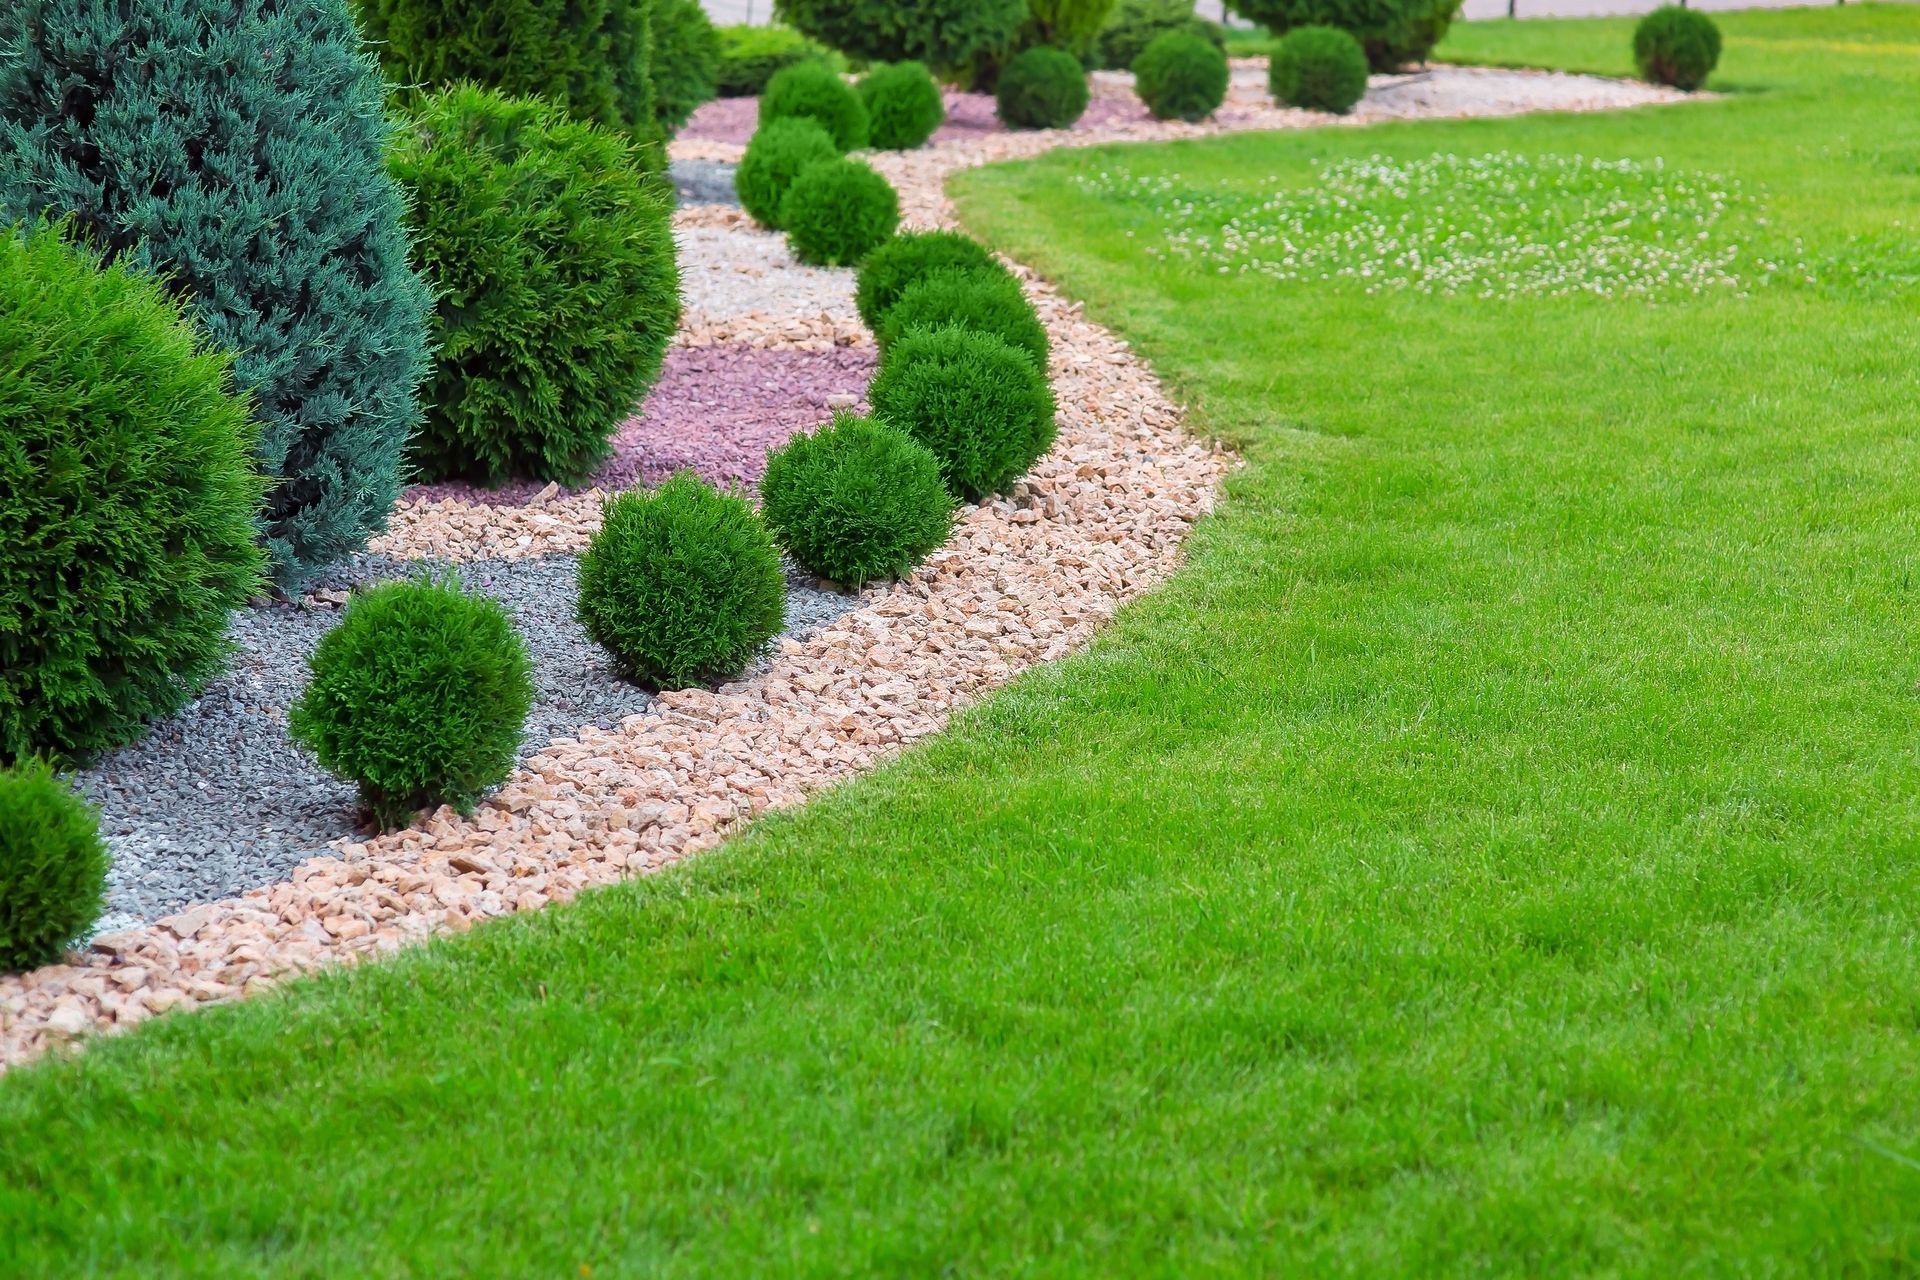 a lush green lawn with bushes and gravel in a garden .